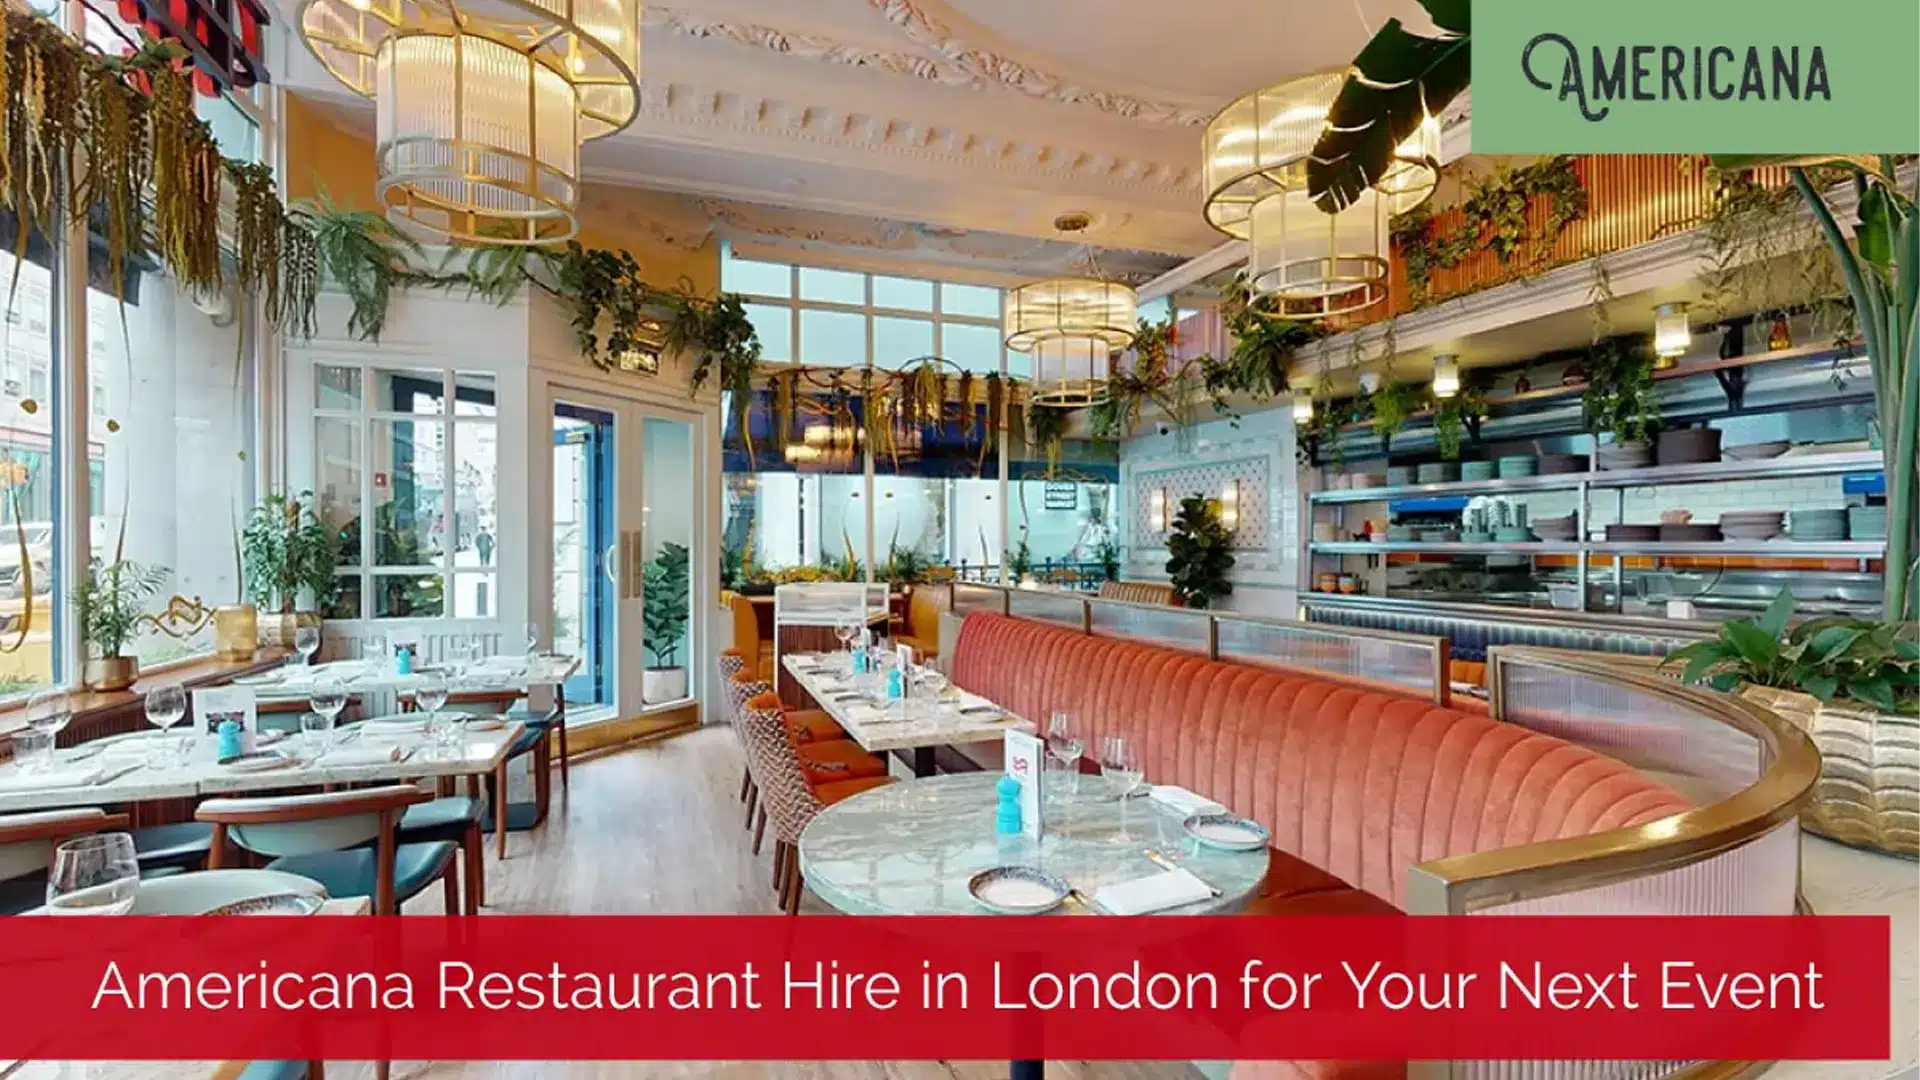 Americana-Restaurant-Hire-in-London-for-Your-Next-Event-min